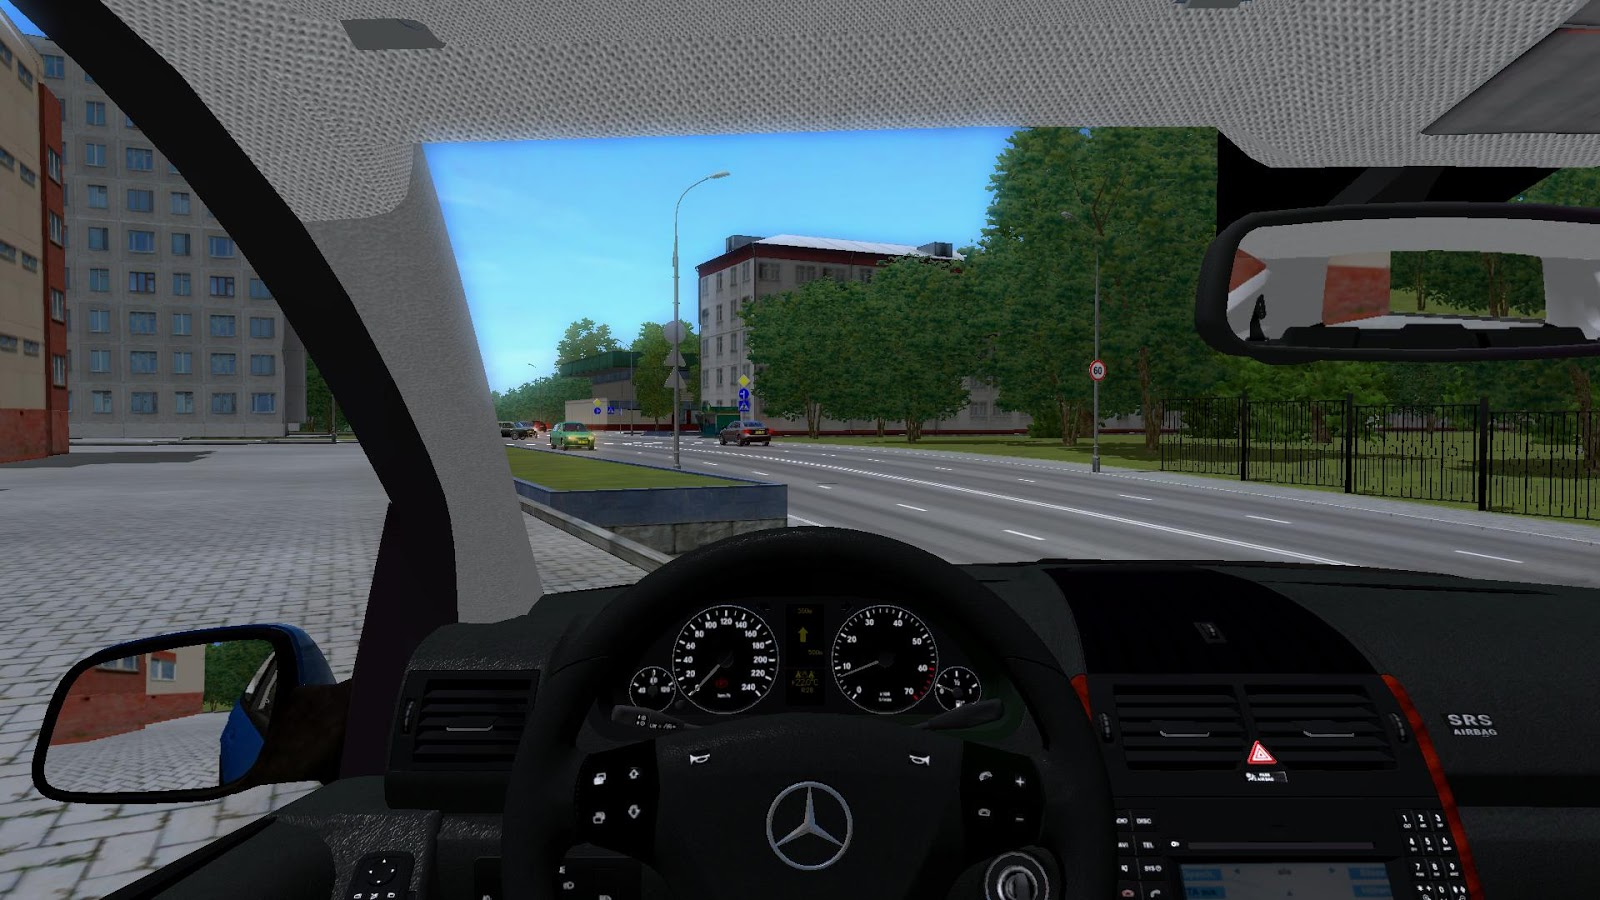 City car Driving Mercedes-Benz a200 Coupe. Mercedes a 200 City car Driving. Mercedes e200 Coupe City car Driving Simulator. City car Driving Simulator 2. Сити кар драйвинг ключ